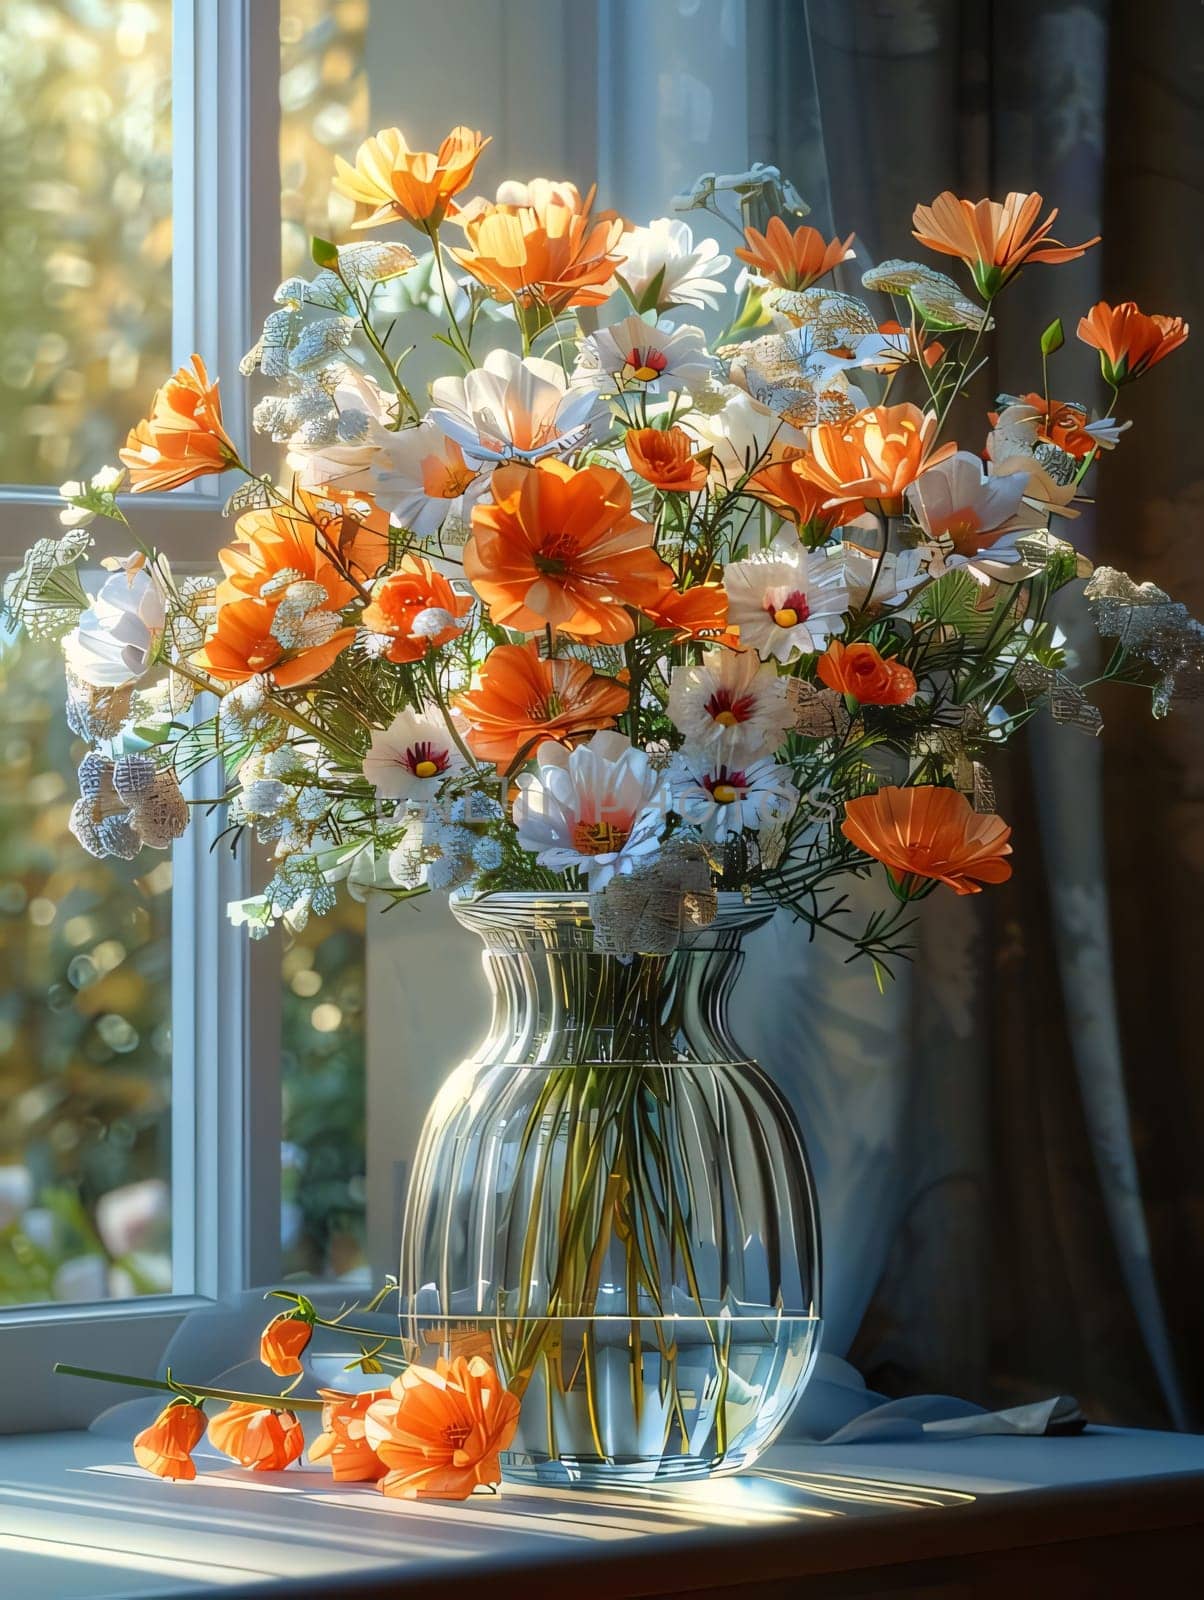 Transparent vase standing on the windowsill in the background window vase of white orange flowers. Flowering flowers, a symbol of spring, new life. by ThemesS